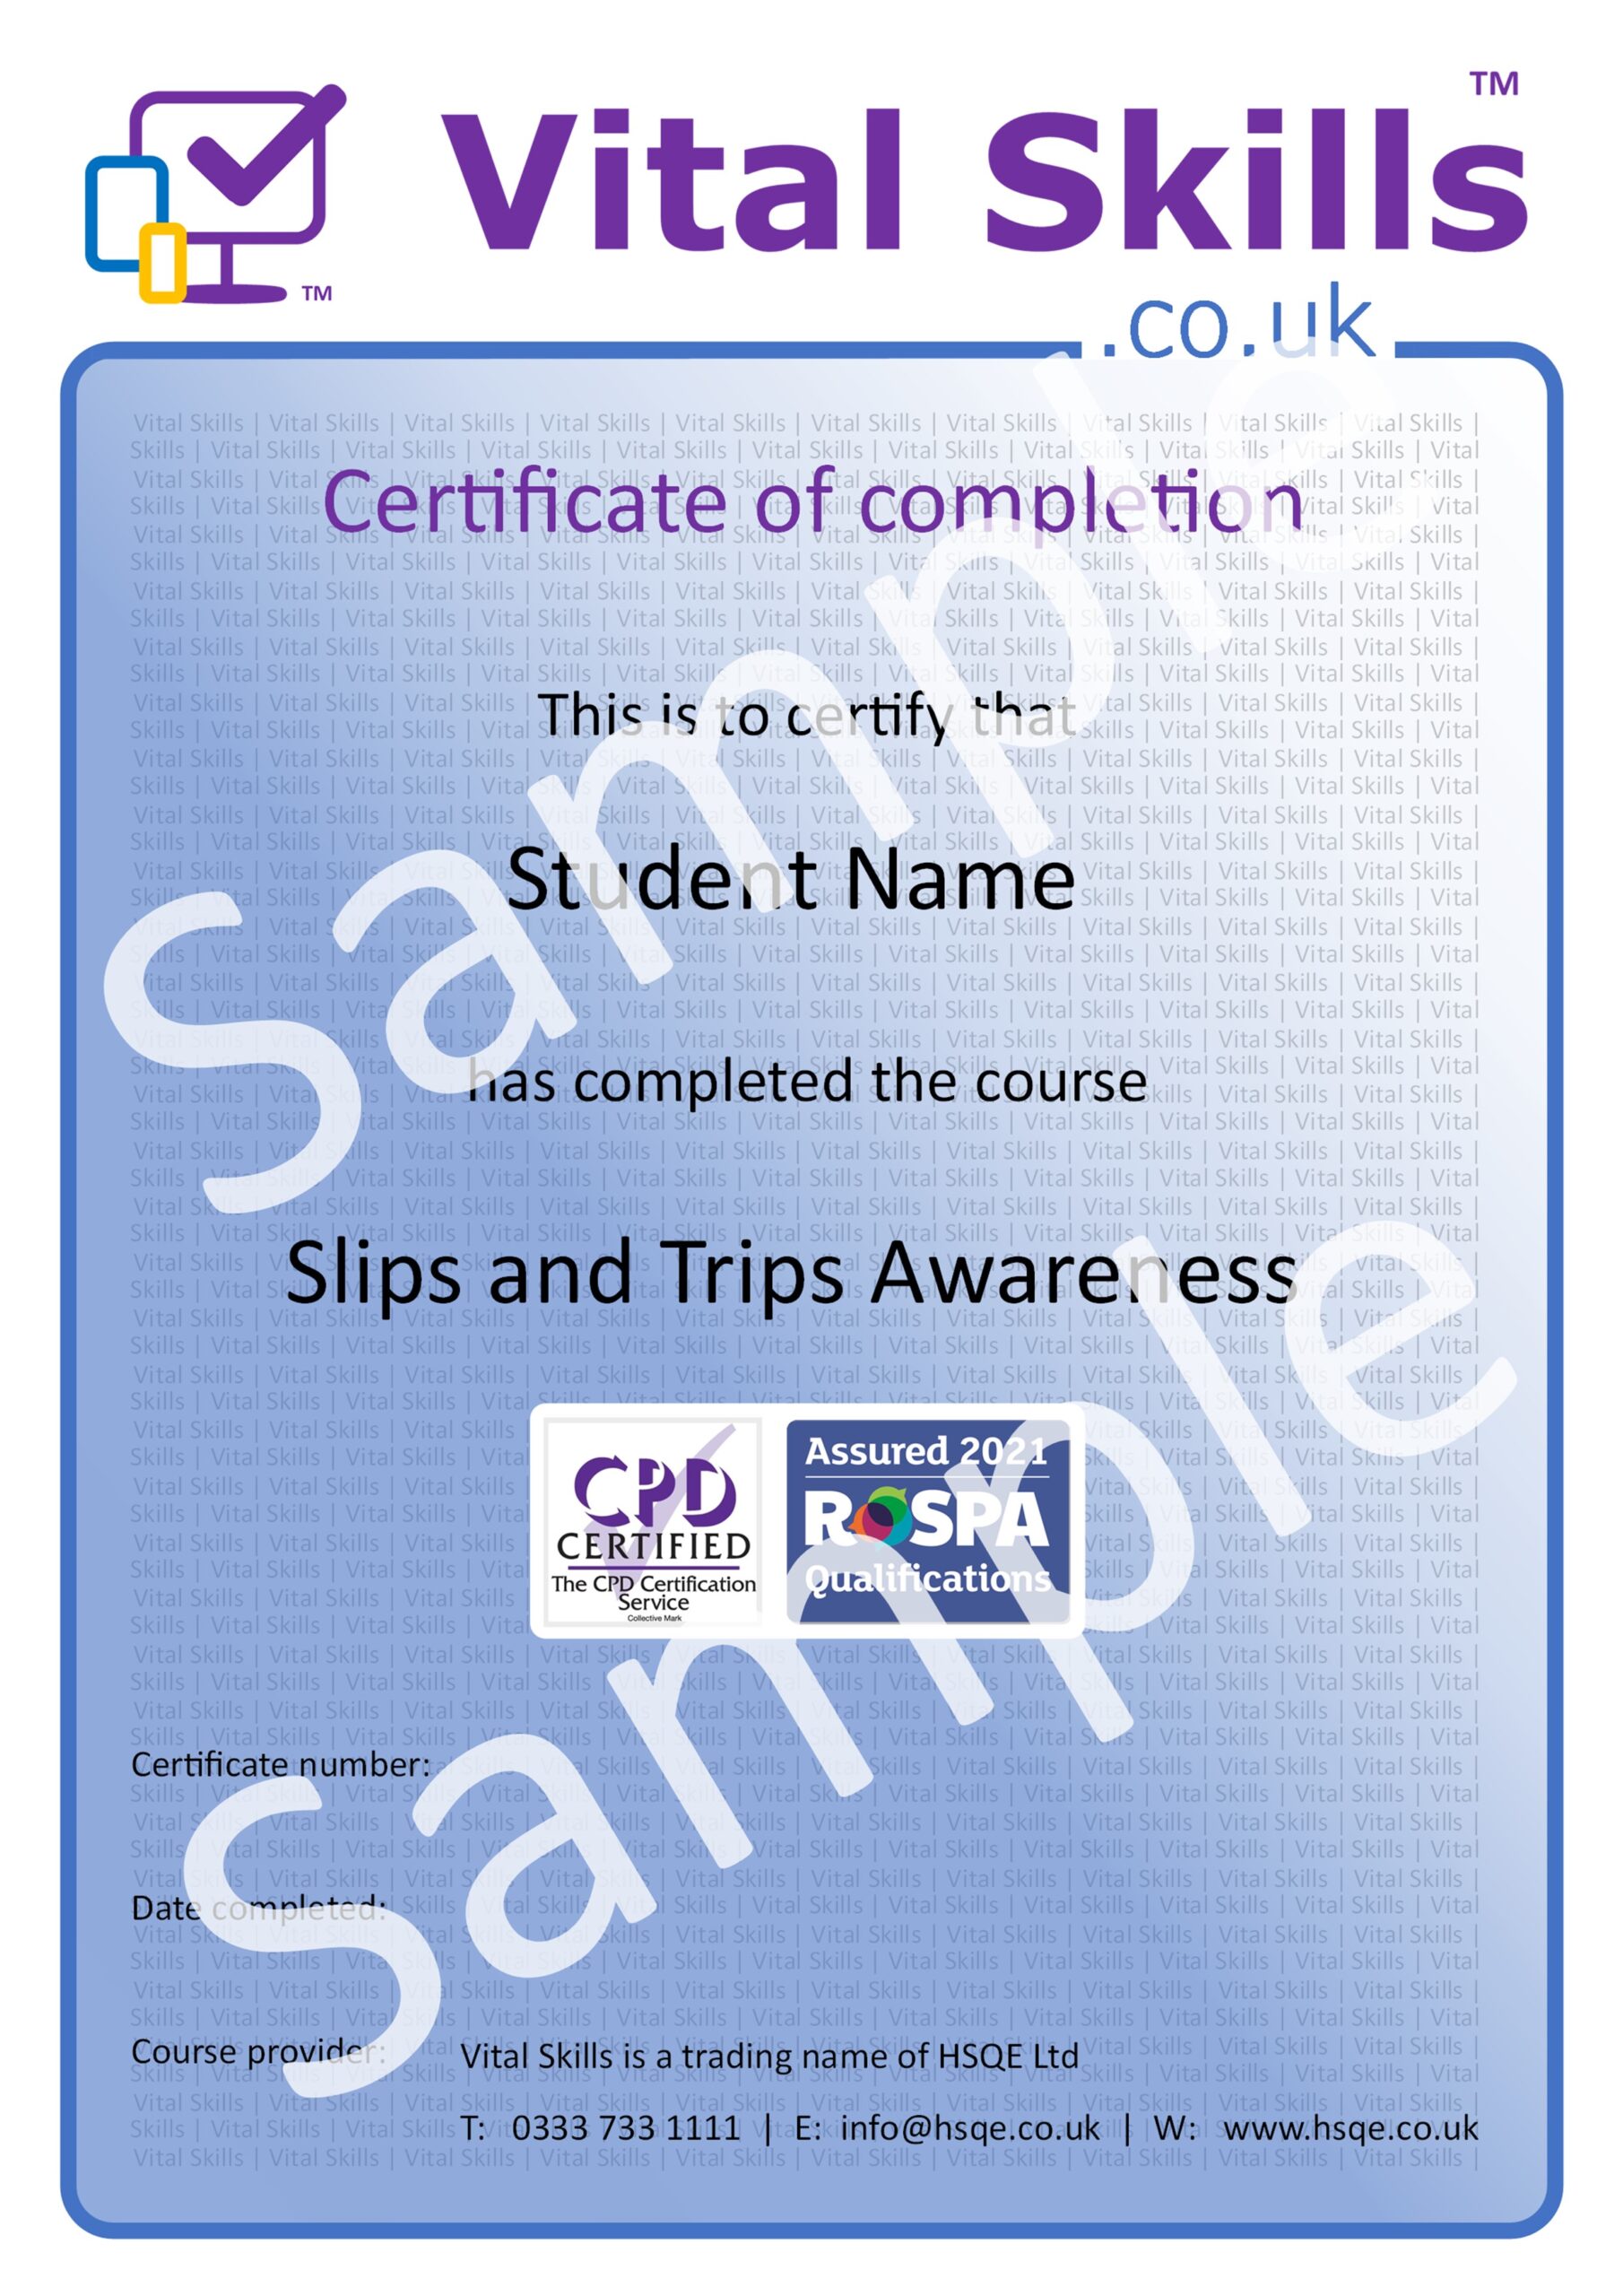 Slips and Trips Awareness Online Training Course Certificate HSQE Vital Skills